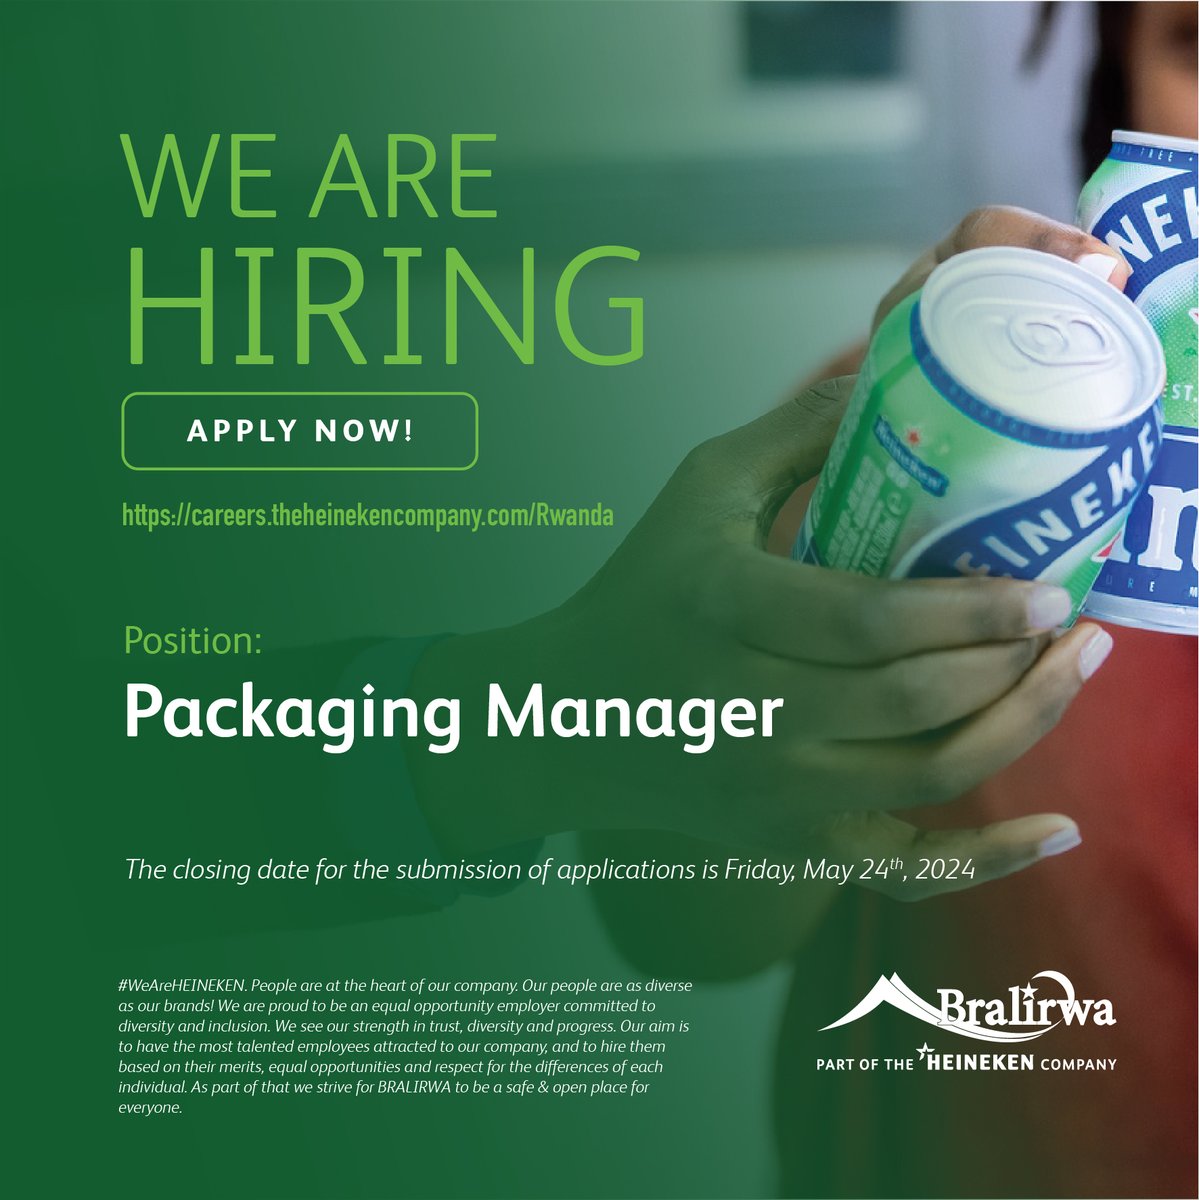 We are looking for a Packaging Manager to join us in brewing the joy of true togetherness. Learn more about the position and apply directly at careers.theheinekencompany.com/Rwanda
#hiringnow #careeropportunities #unleashyourpotential #webrewthejoyoftruetogetherness